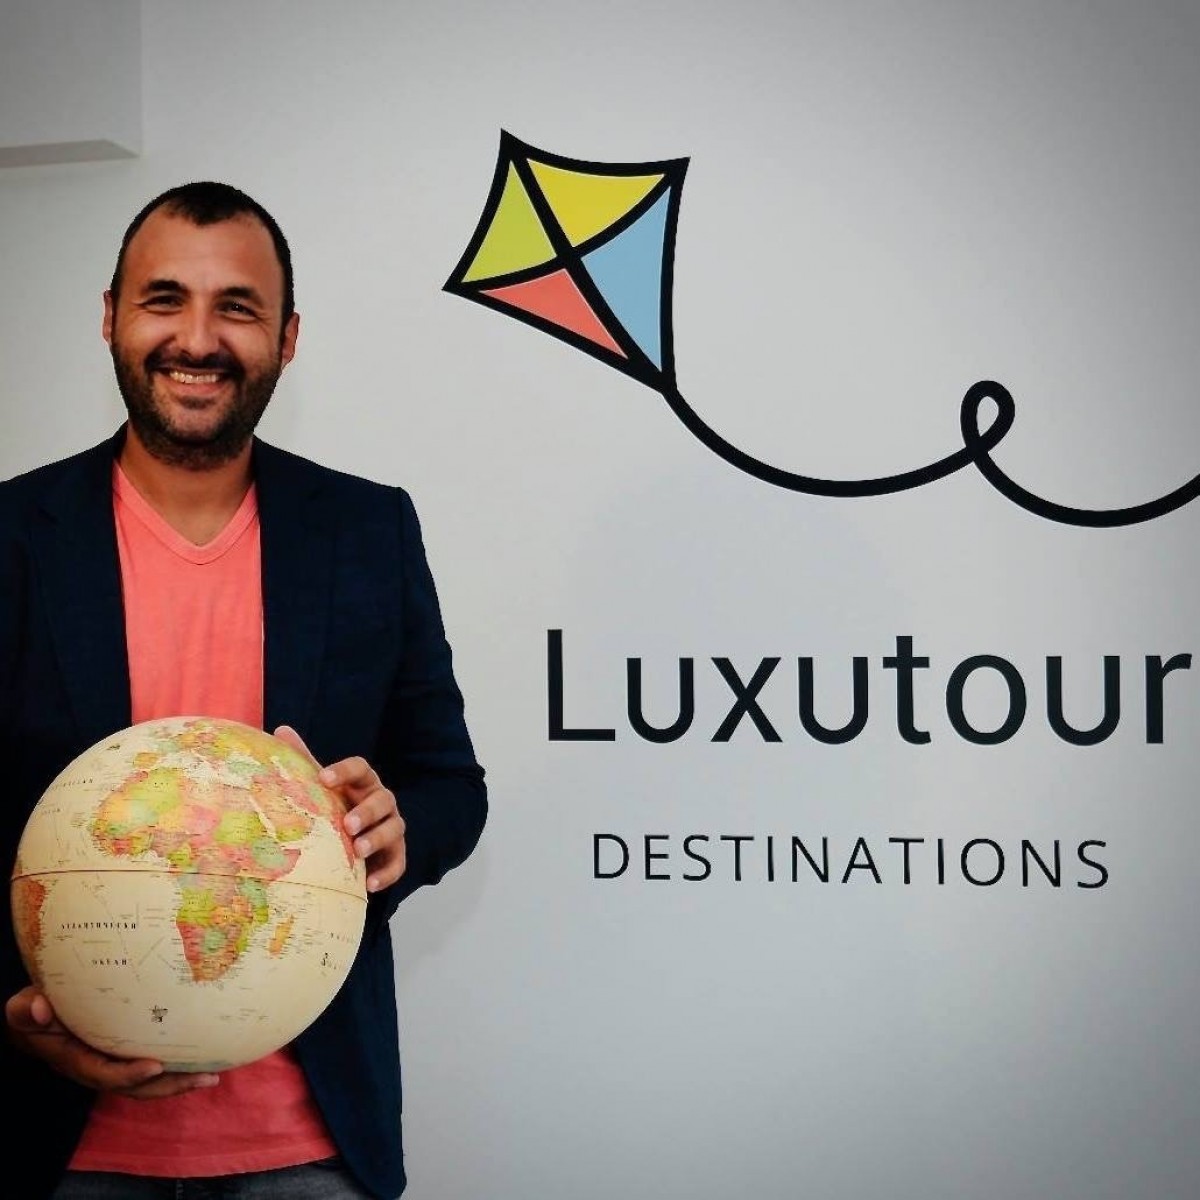 Exotic journeys with Luxutour